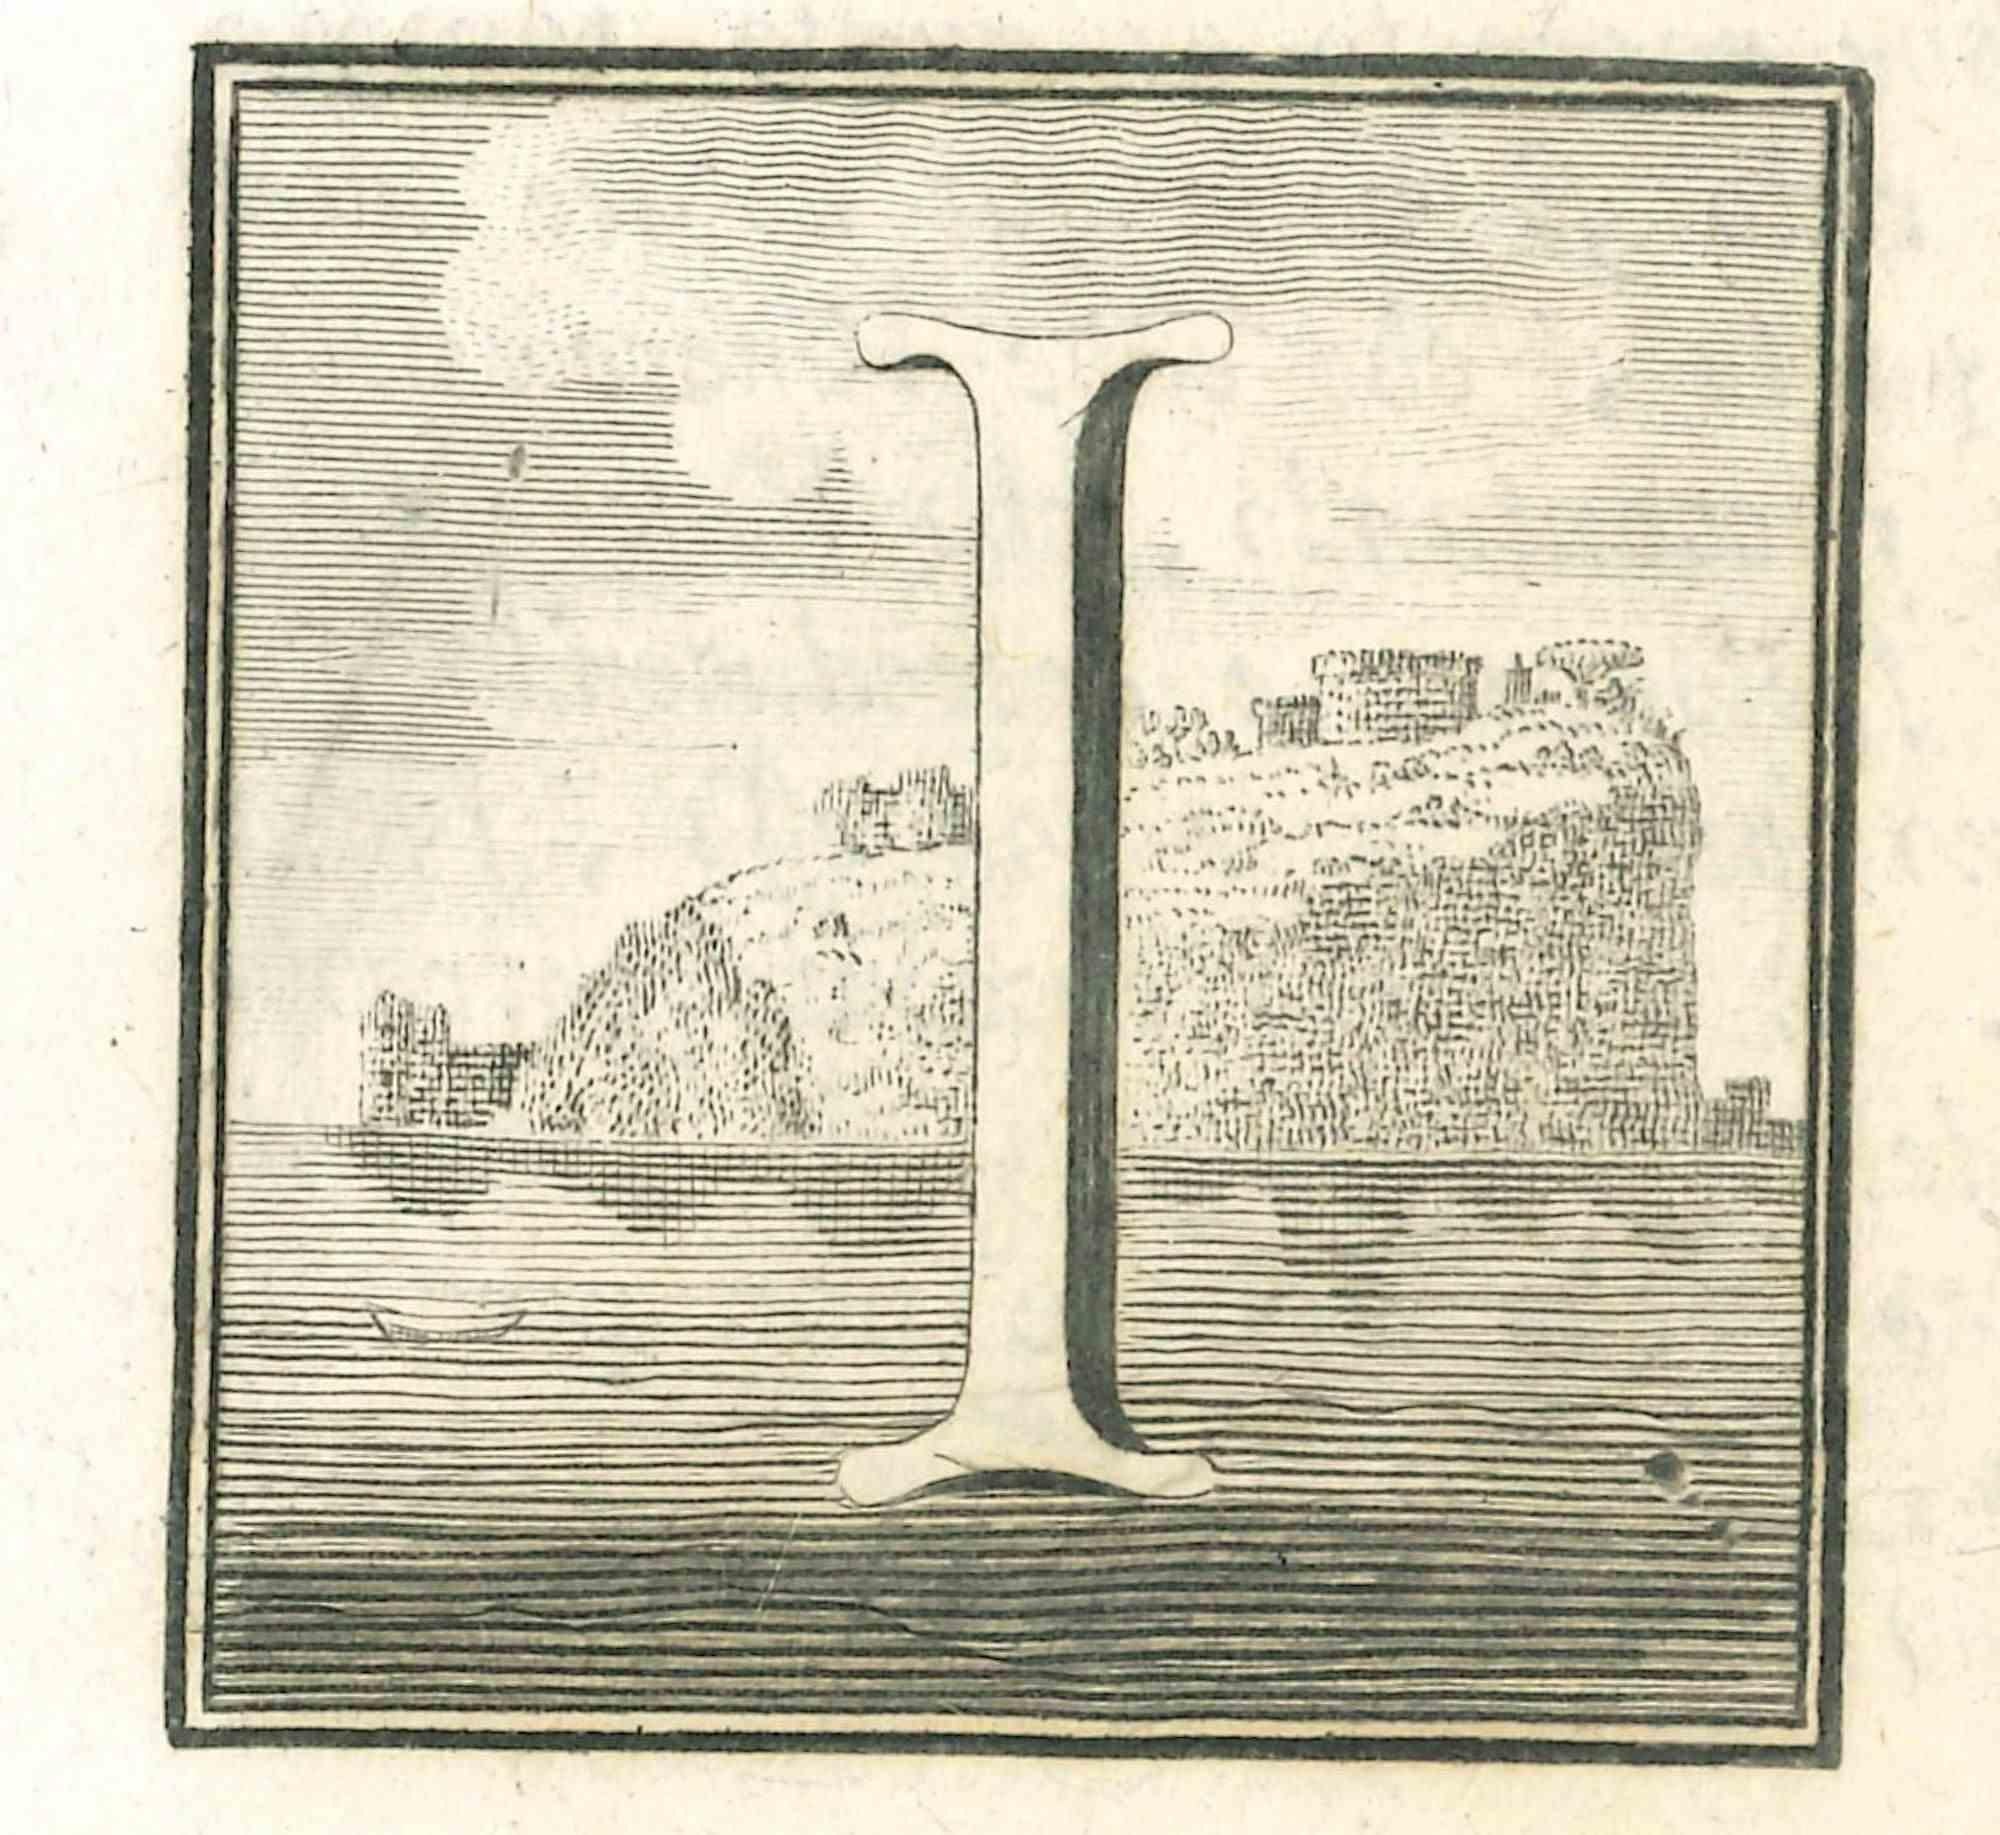 Letter of the Alphabet I,  from the series "Antiquities of Herculaneum", is an etching on paper realized by Luigi Vanvitelli in the 18th century.

Good conditions.

The etching belongs to the print suite “Antiquities of Herculaneum Exposed”